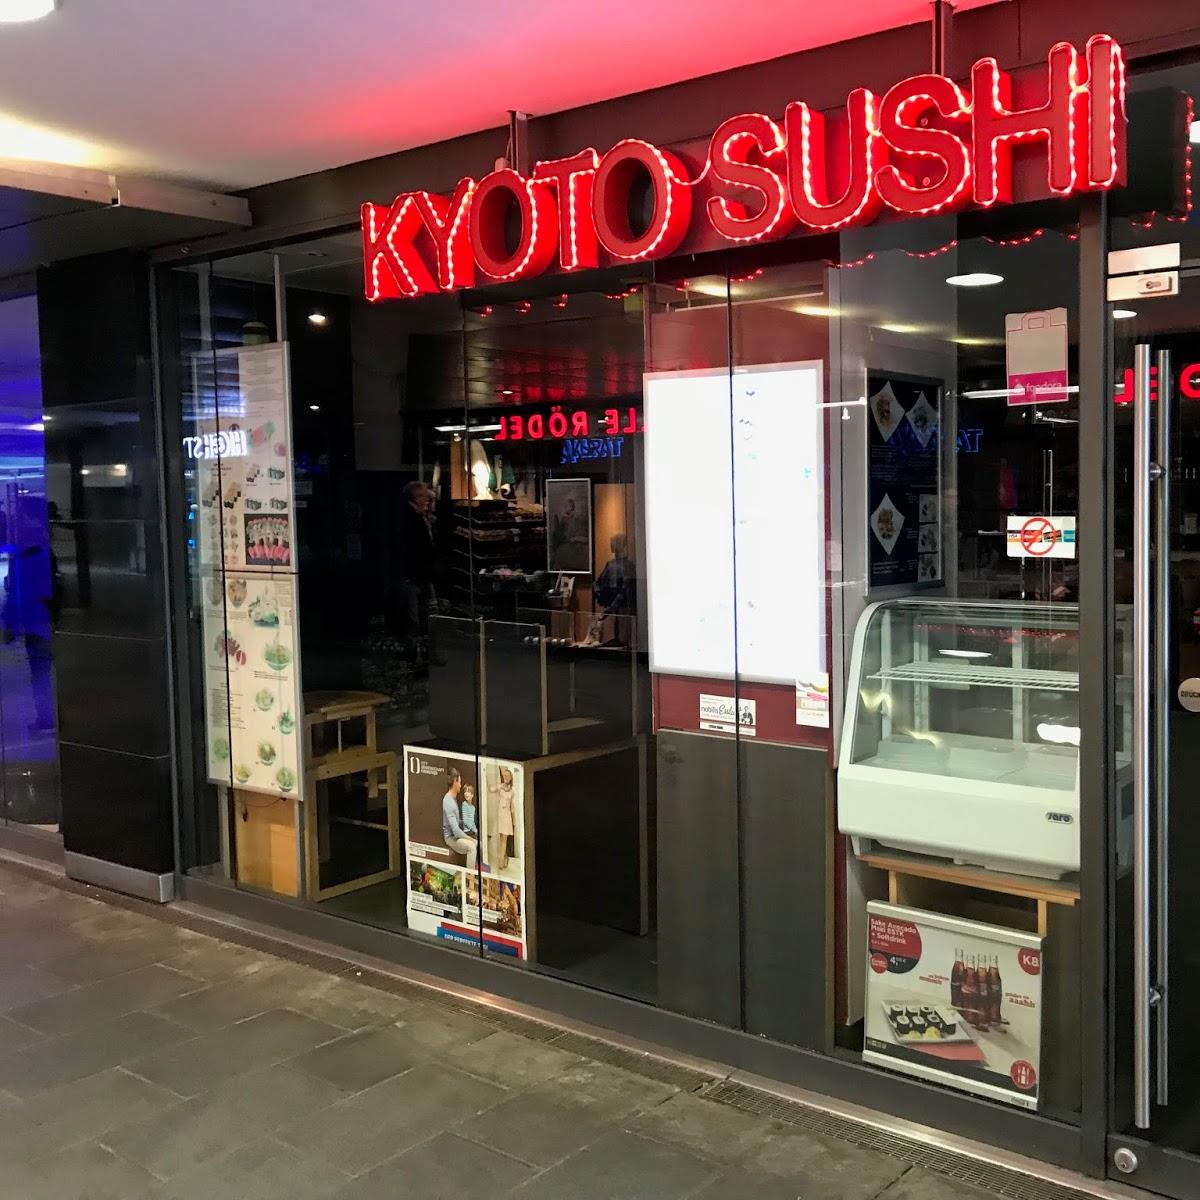 Restaurant "Kyoto Sushi" in Hannover